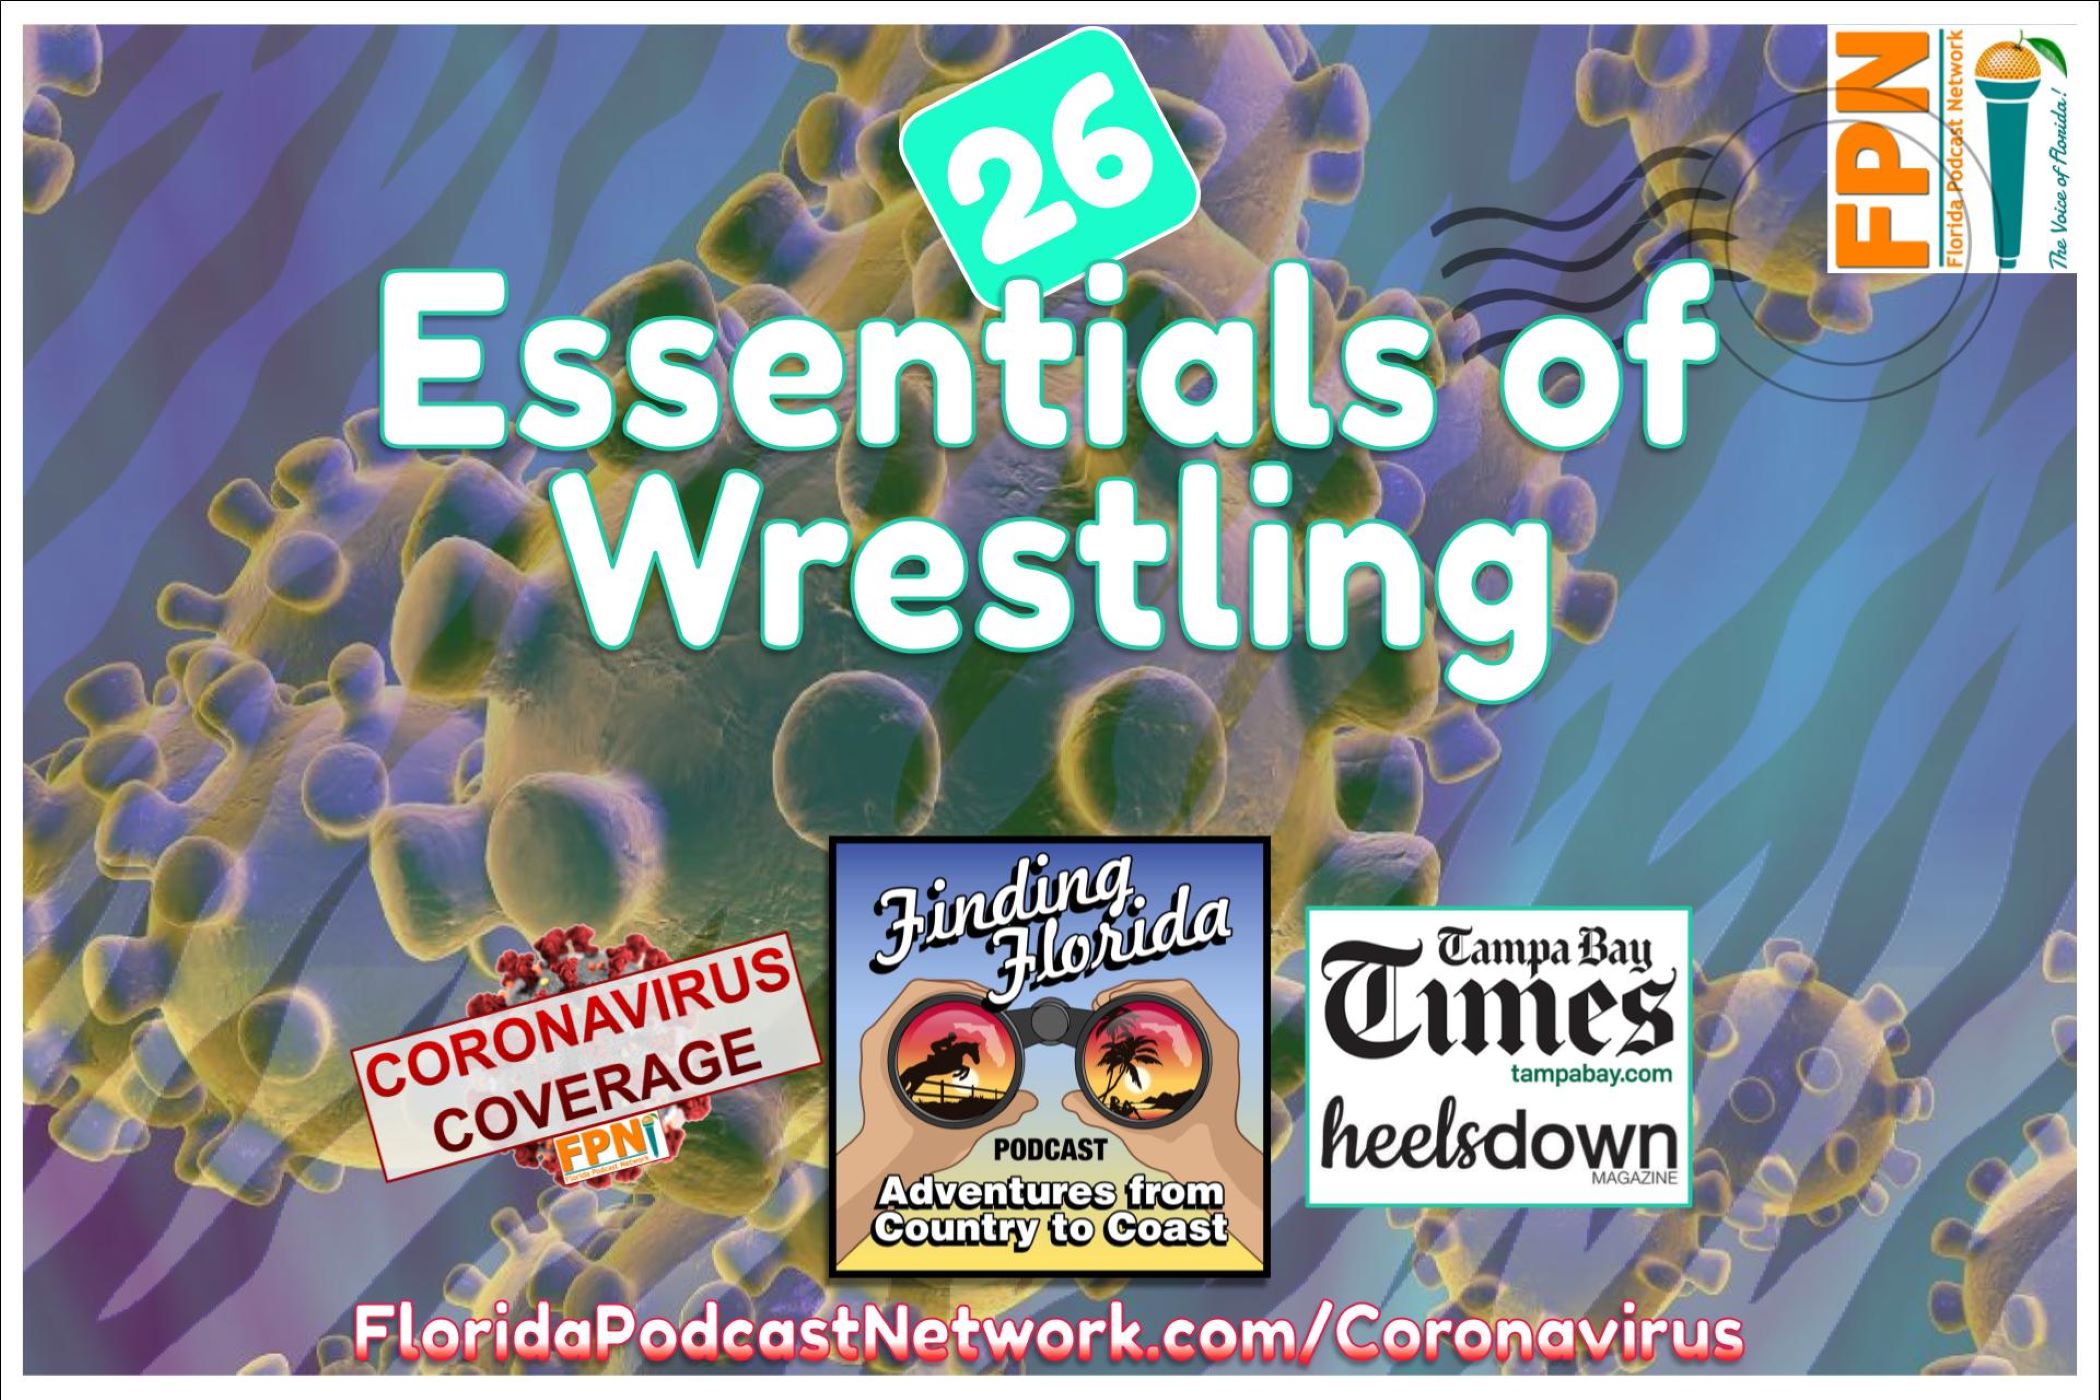 Professional Wrestling, Restaurants, Community Clipboard, Florid-DUH, and Tiger King Found Footage